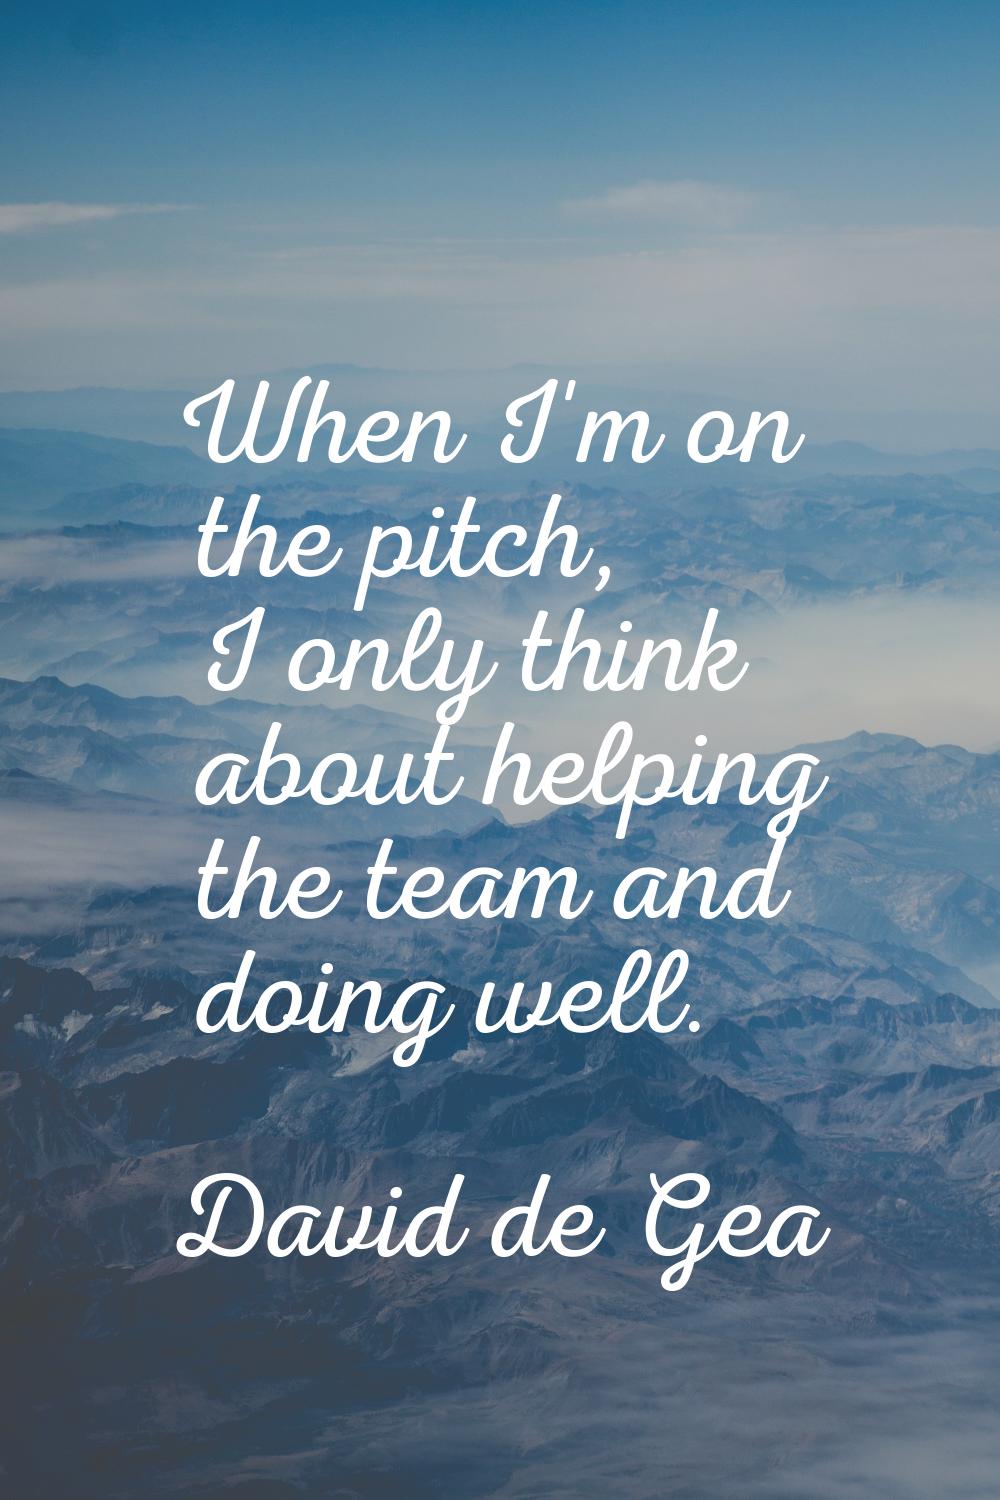 When I'm on the pitch, I only think about helping the team and doing well.